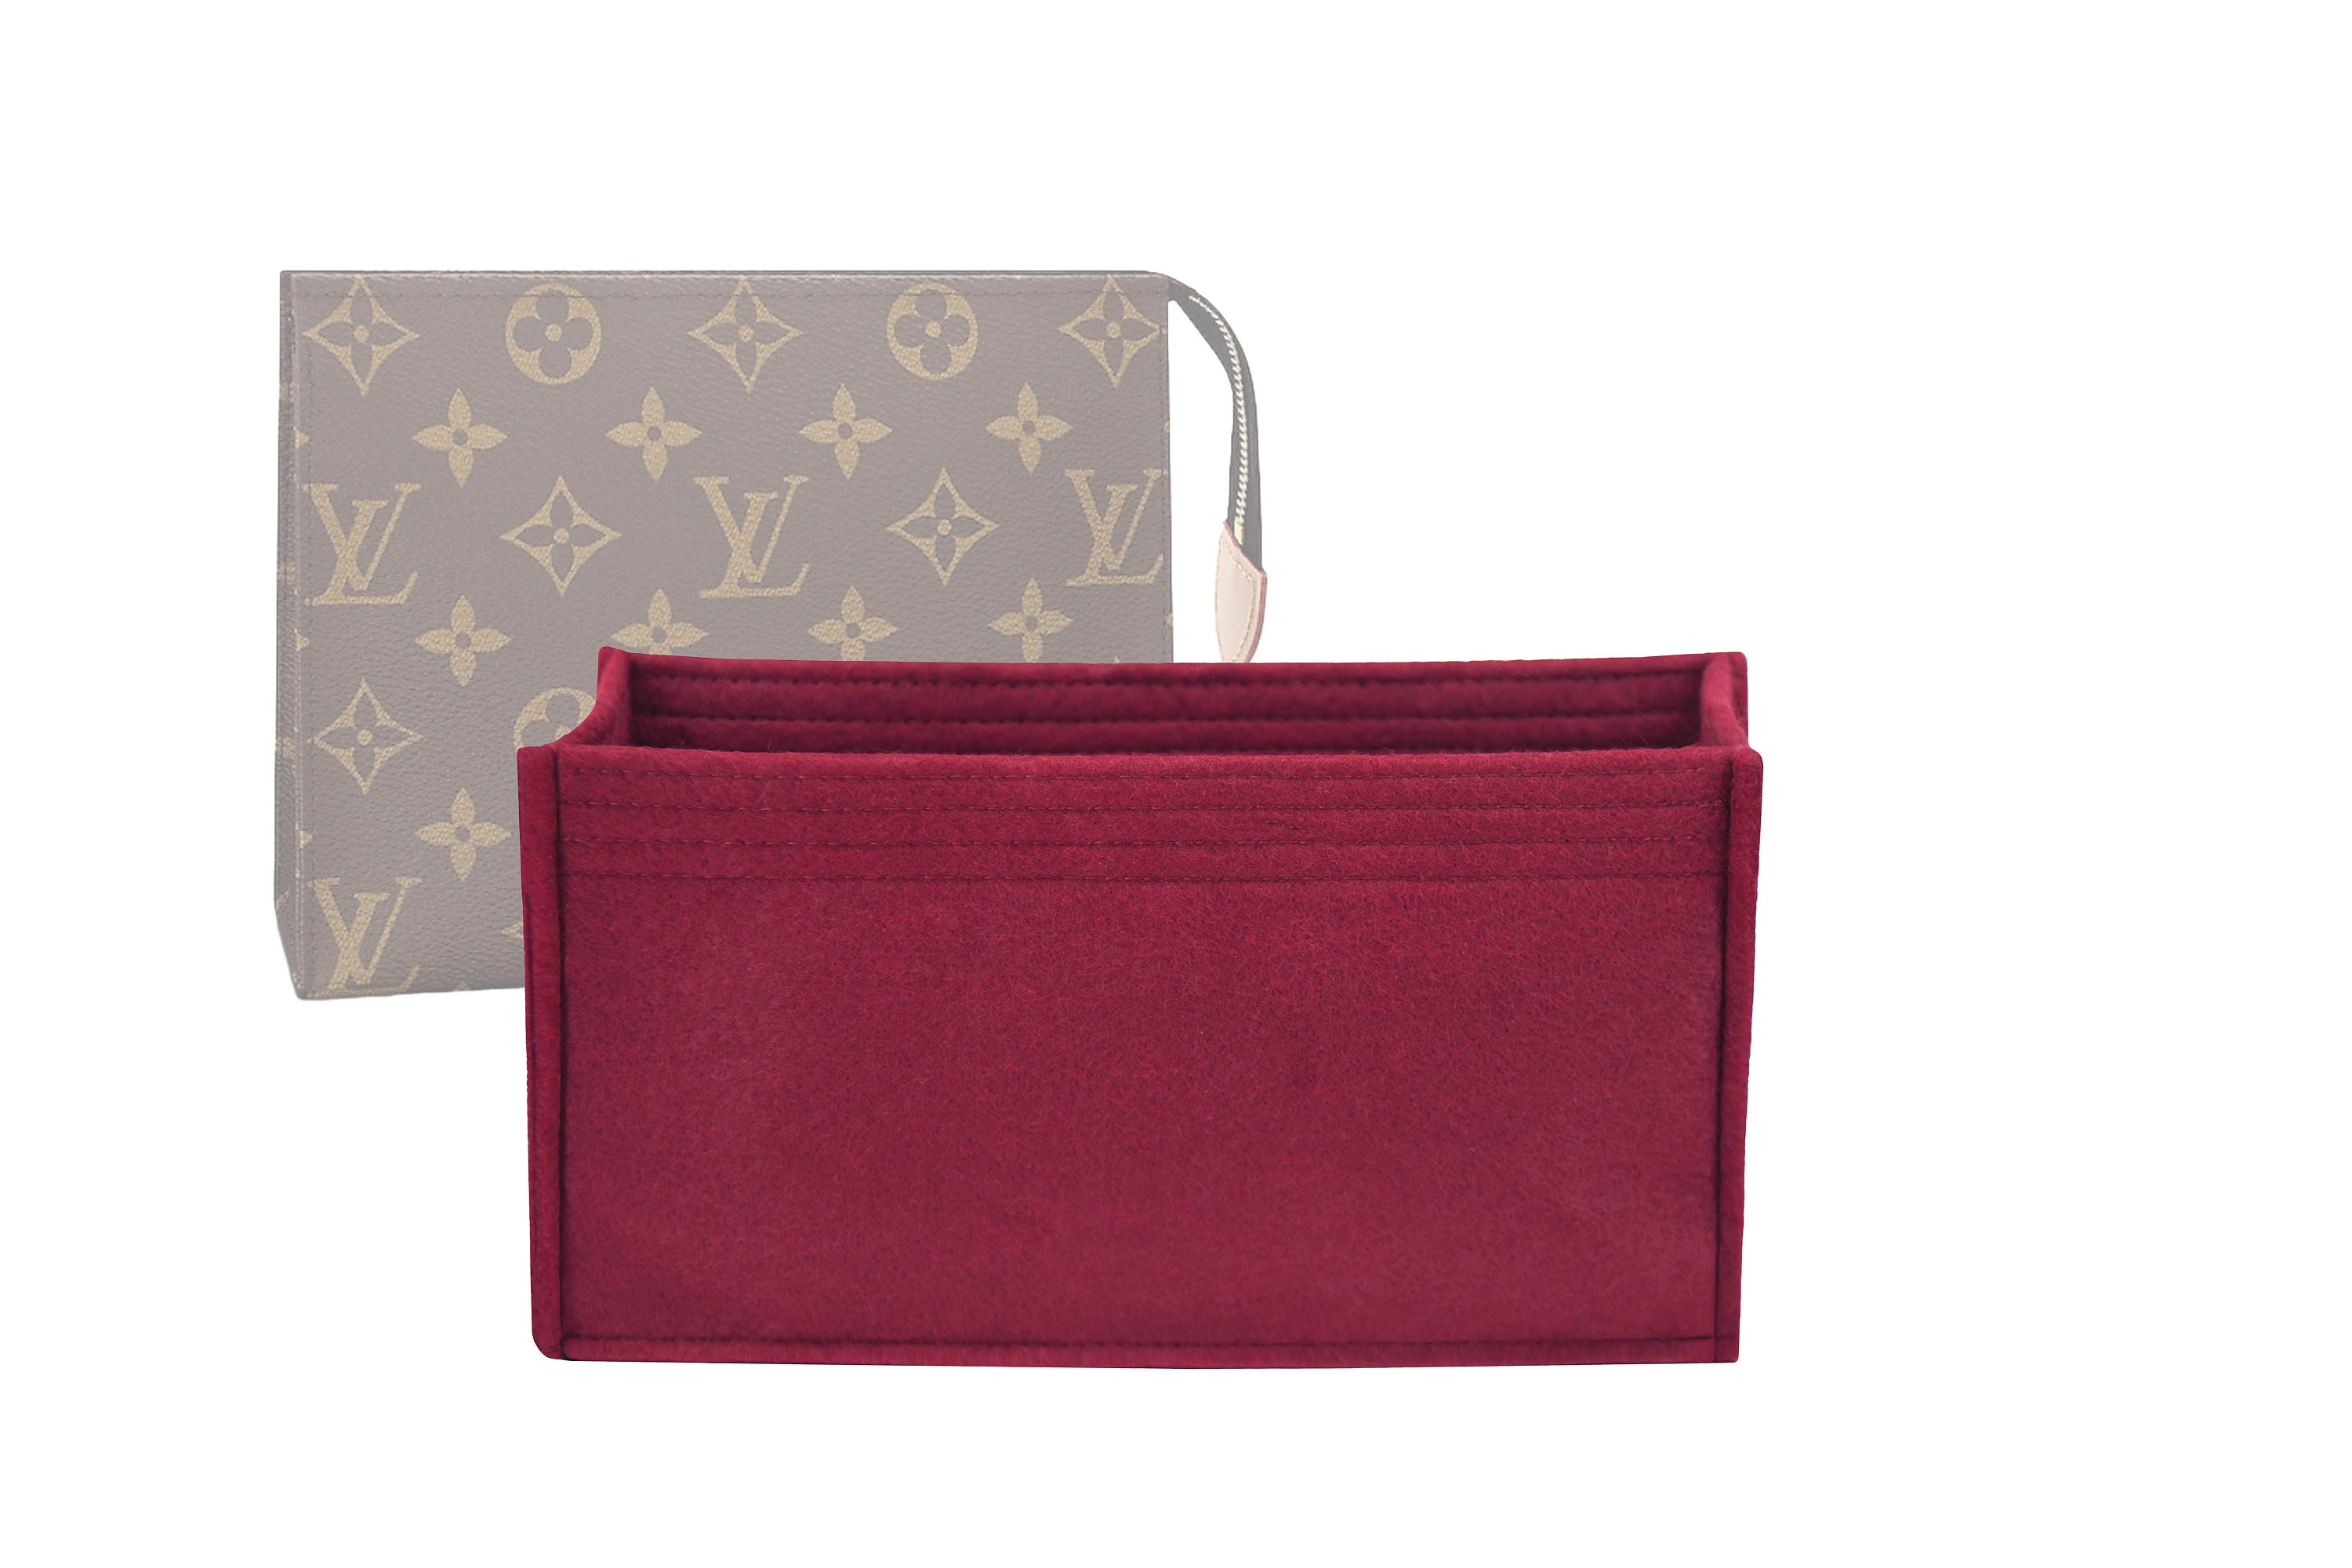  Vercord Felt Purse Insert Organizer 26 19 Toiletry Pouch Insert  with D Ring Attach Chain Strap Red L : Clothing, Shoes & Jewelry